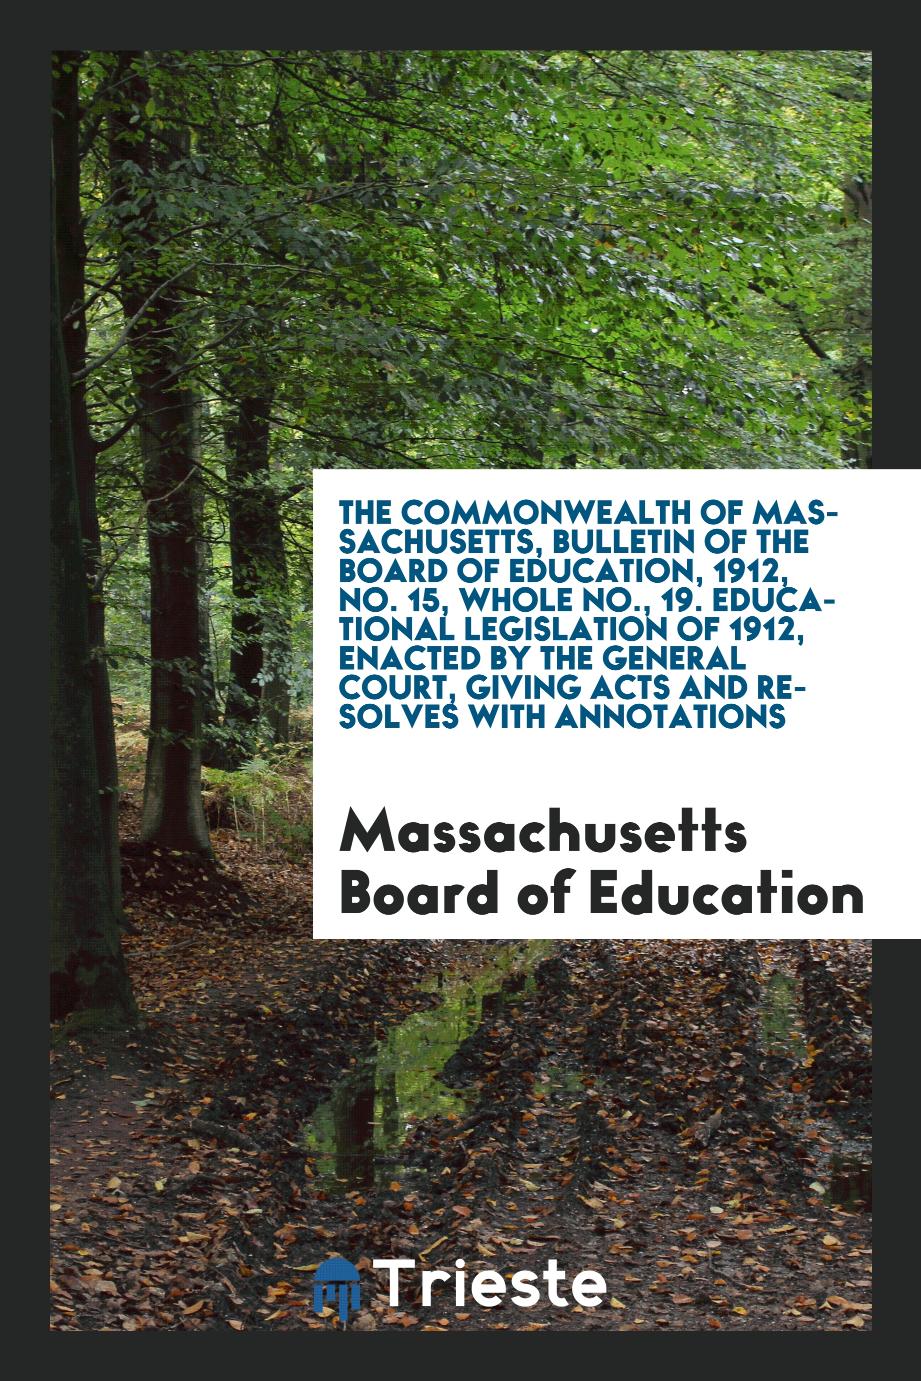 The Commonwealth of Massachusetts, bulletin of the board of education, 1912, No. 15, whole No., 19. Educational legislation of 1912, enacted by the General Court, giving acts and resolves with annotations